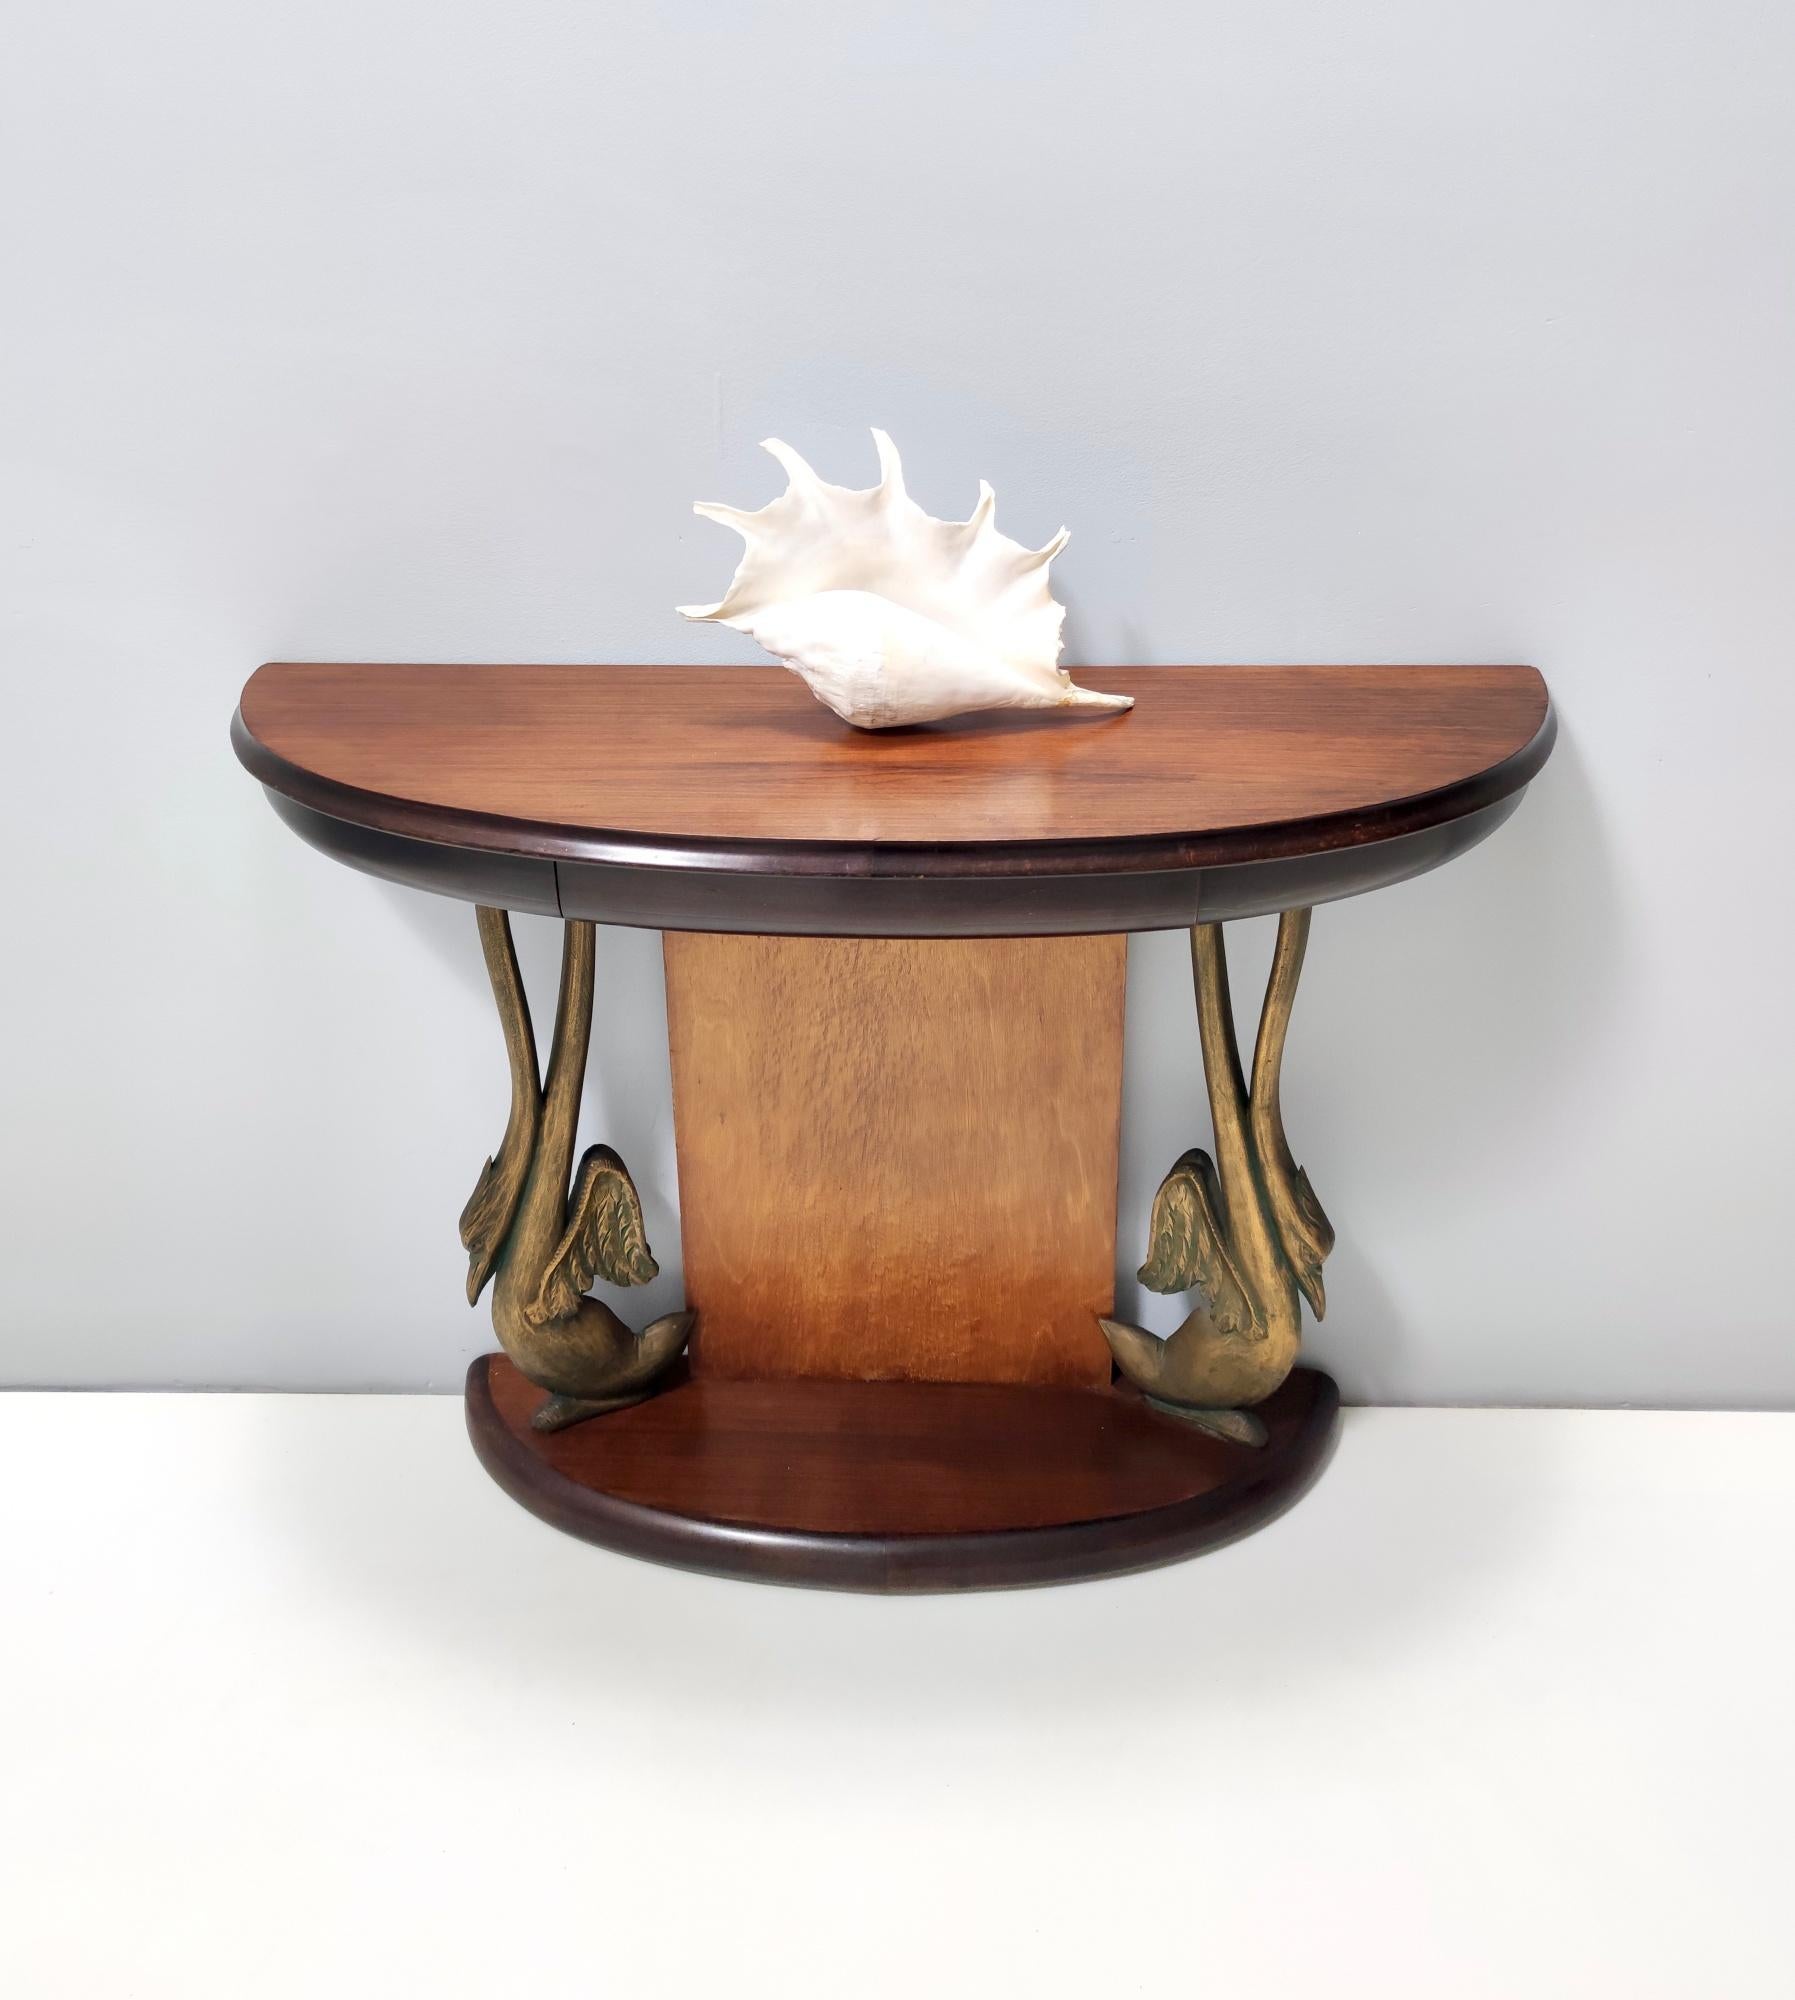 Made in Italy, 1950s. 
This is a high-quality console table, which is made in dyed Canaletto walnut and beech. 
It features two carved swans next to the pedestal.
This is a vintage piece, therefore it might show slight traces of use, but it can be